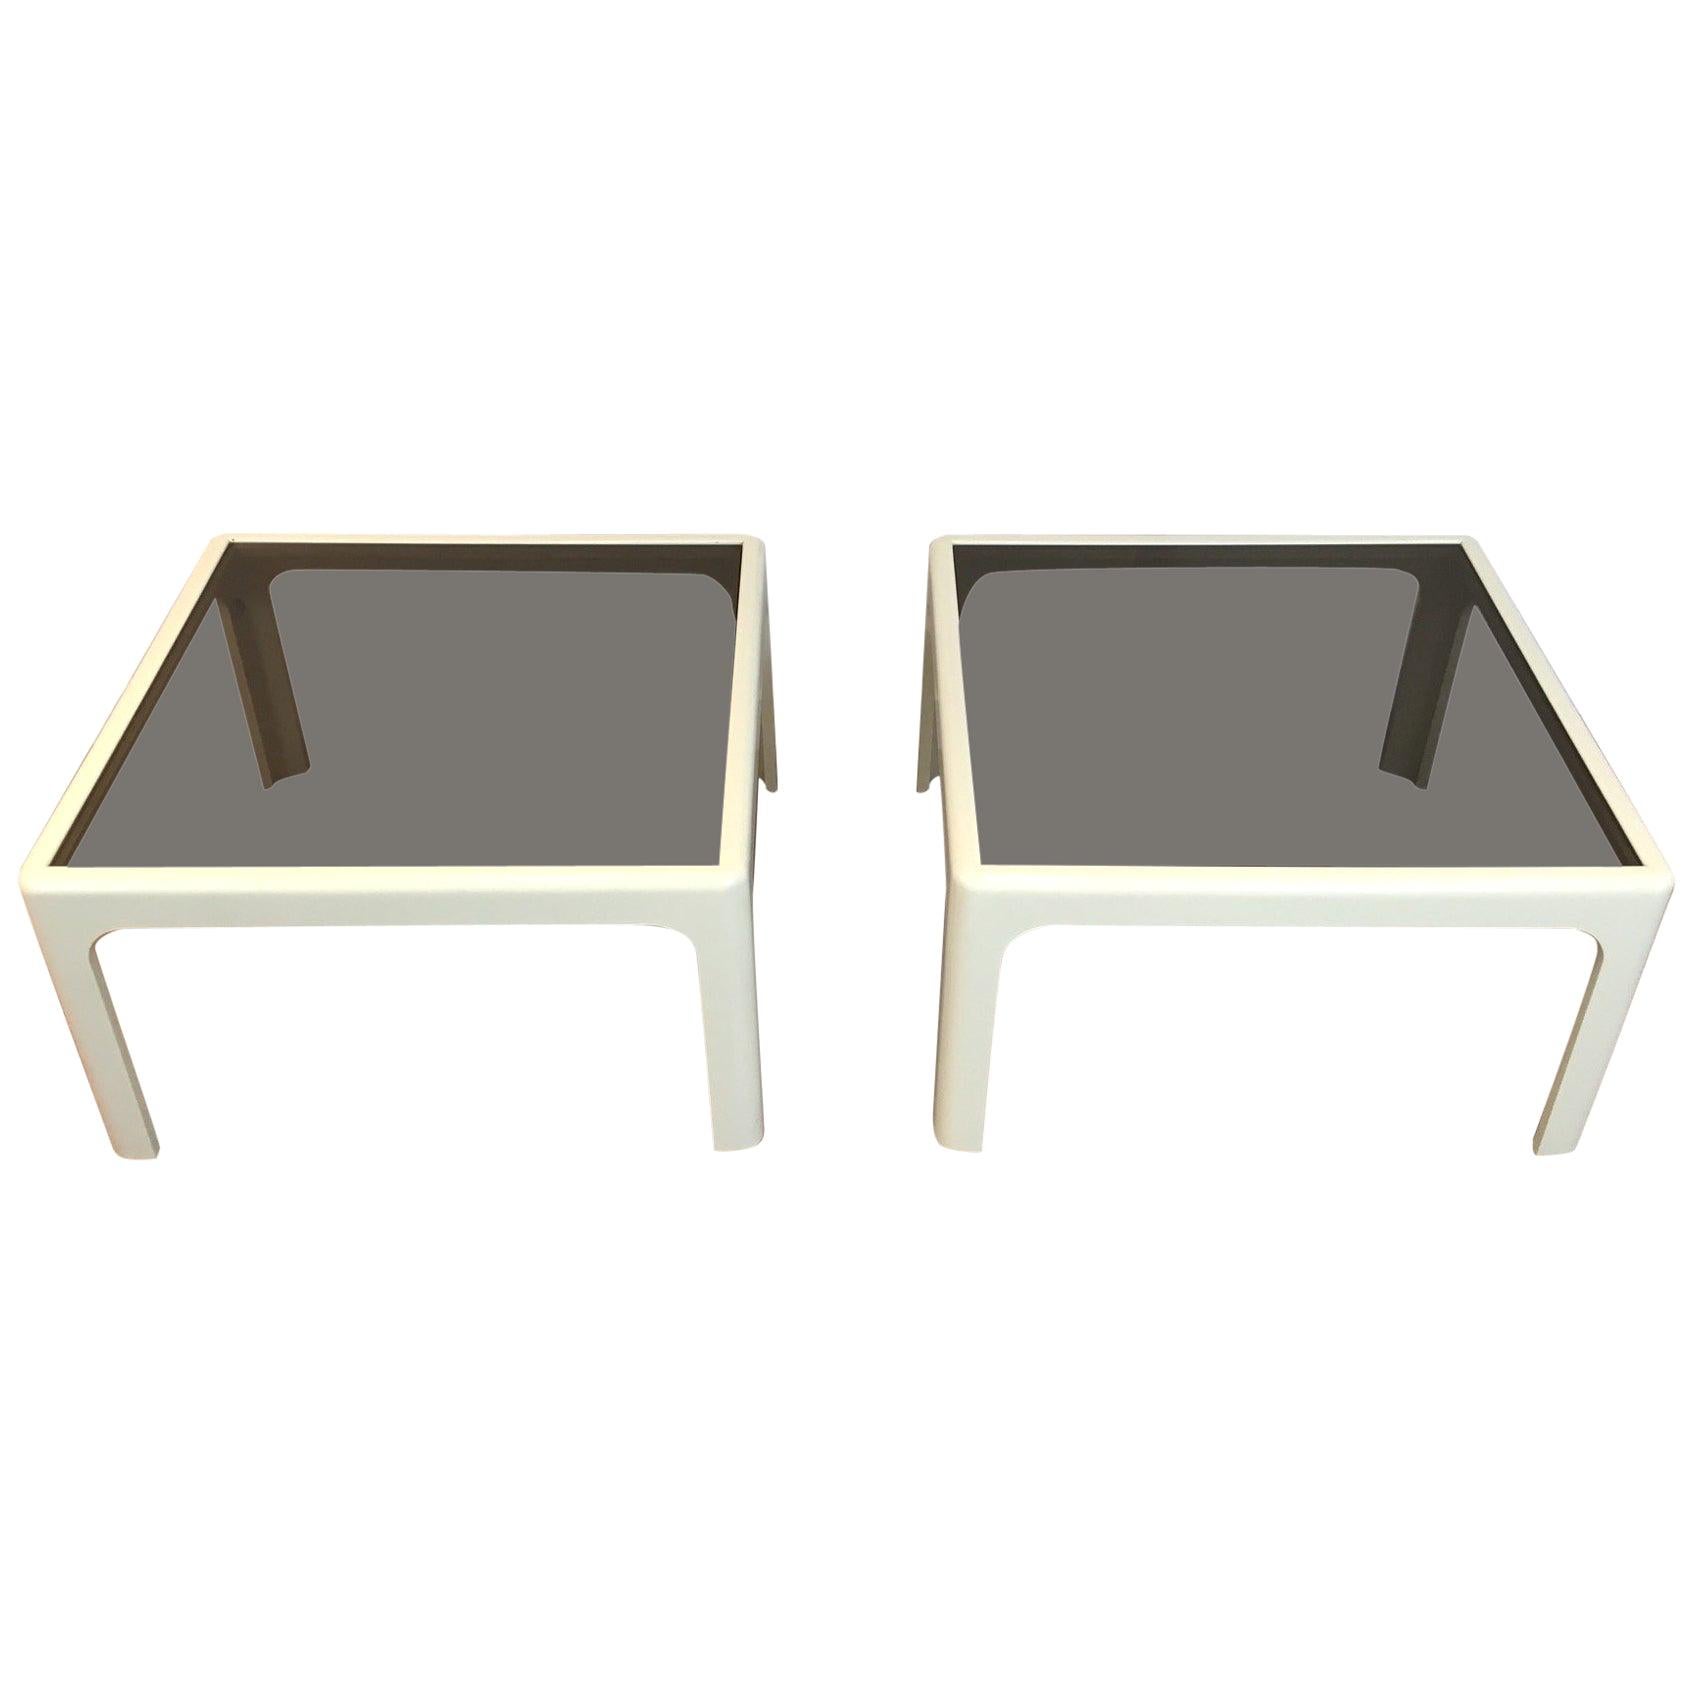 Pair of Large White Fiberglass Side Tables, German, circa 1970 For Sale